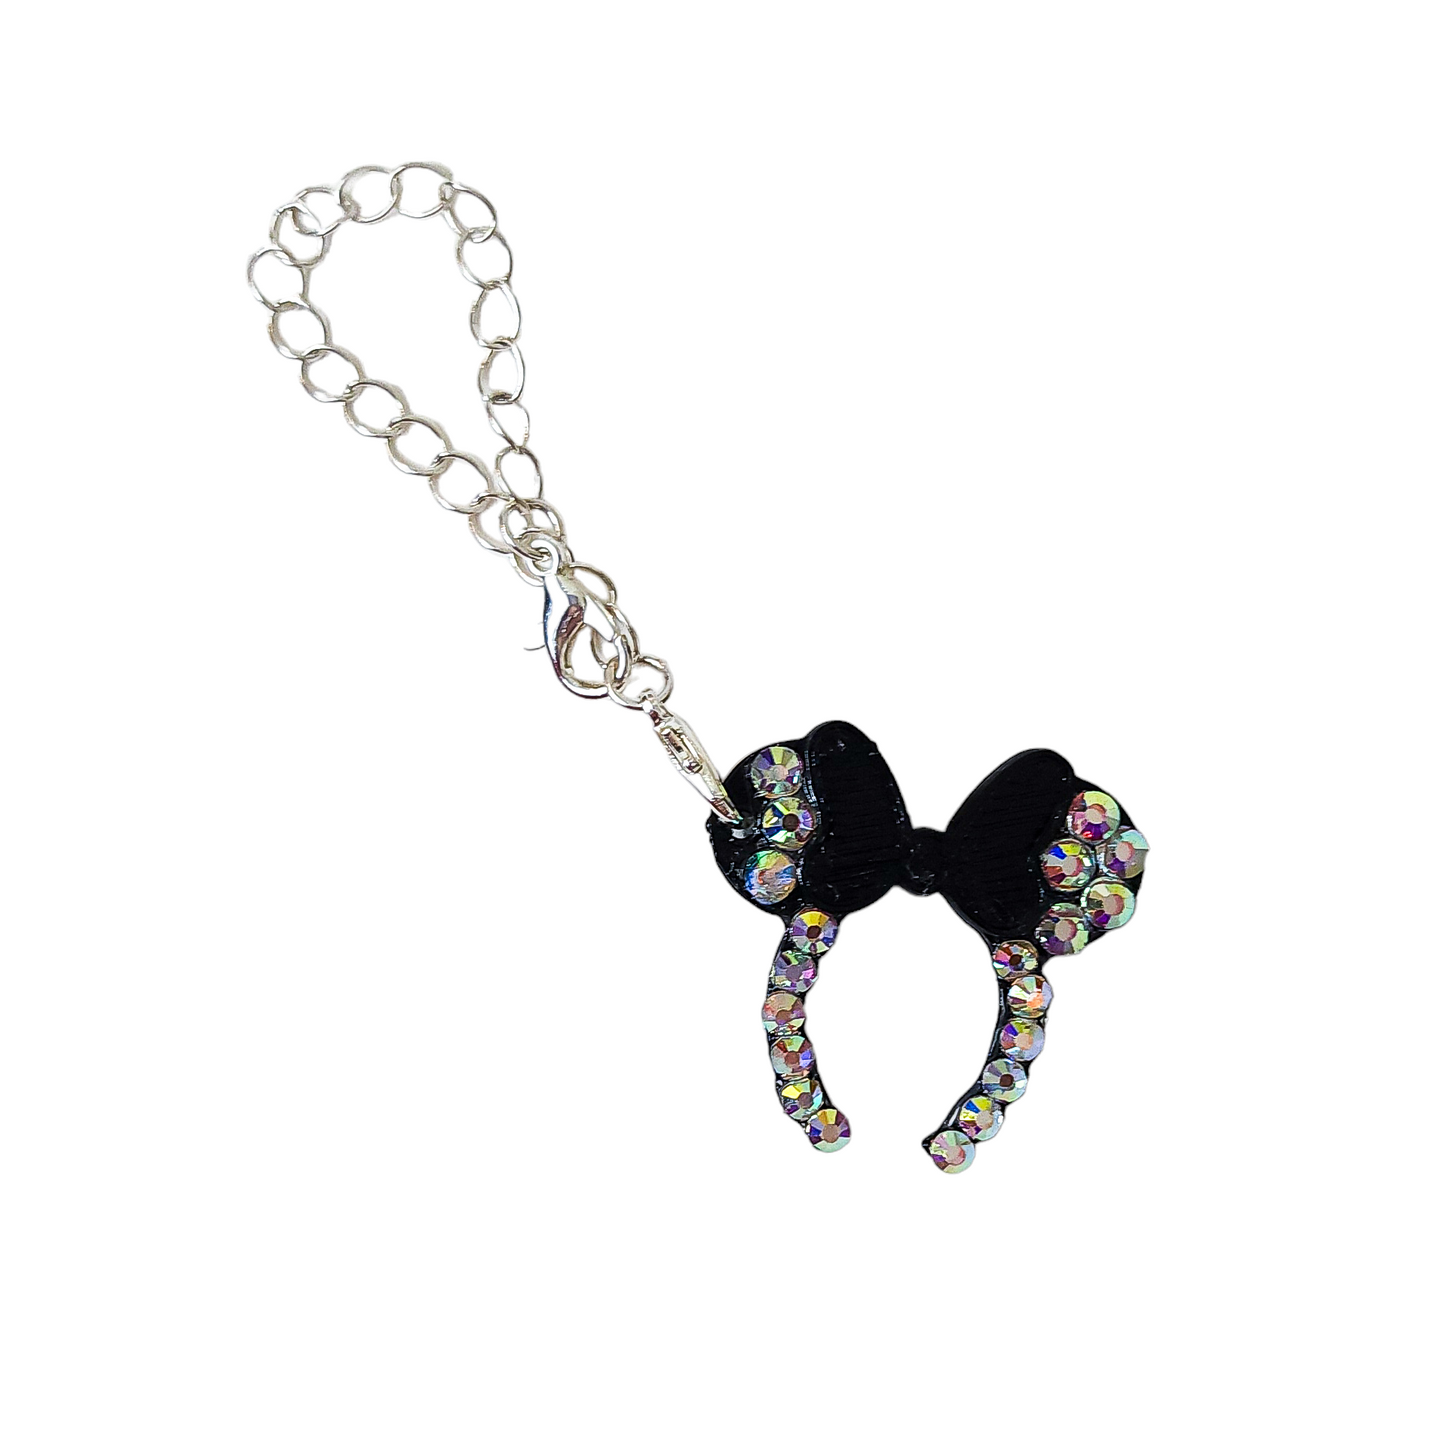 Tumbler charm 1 mouse headband with rhinestones. Gold or silver chain